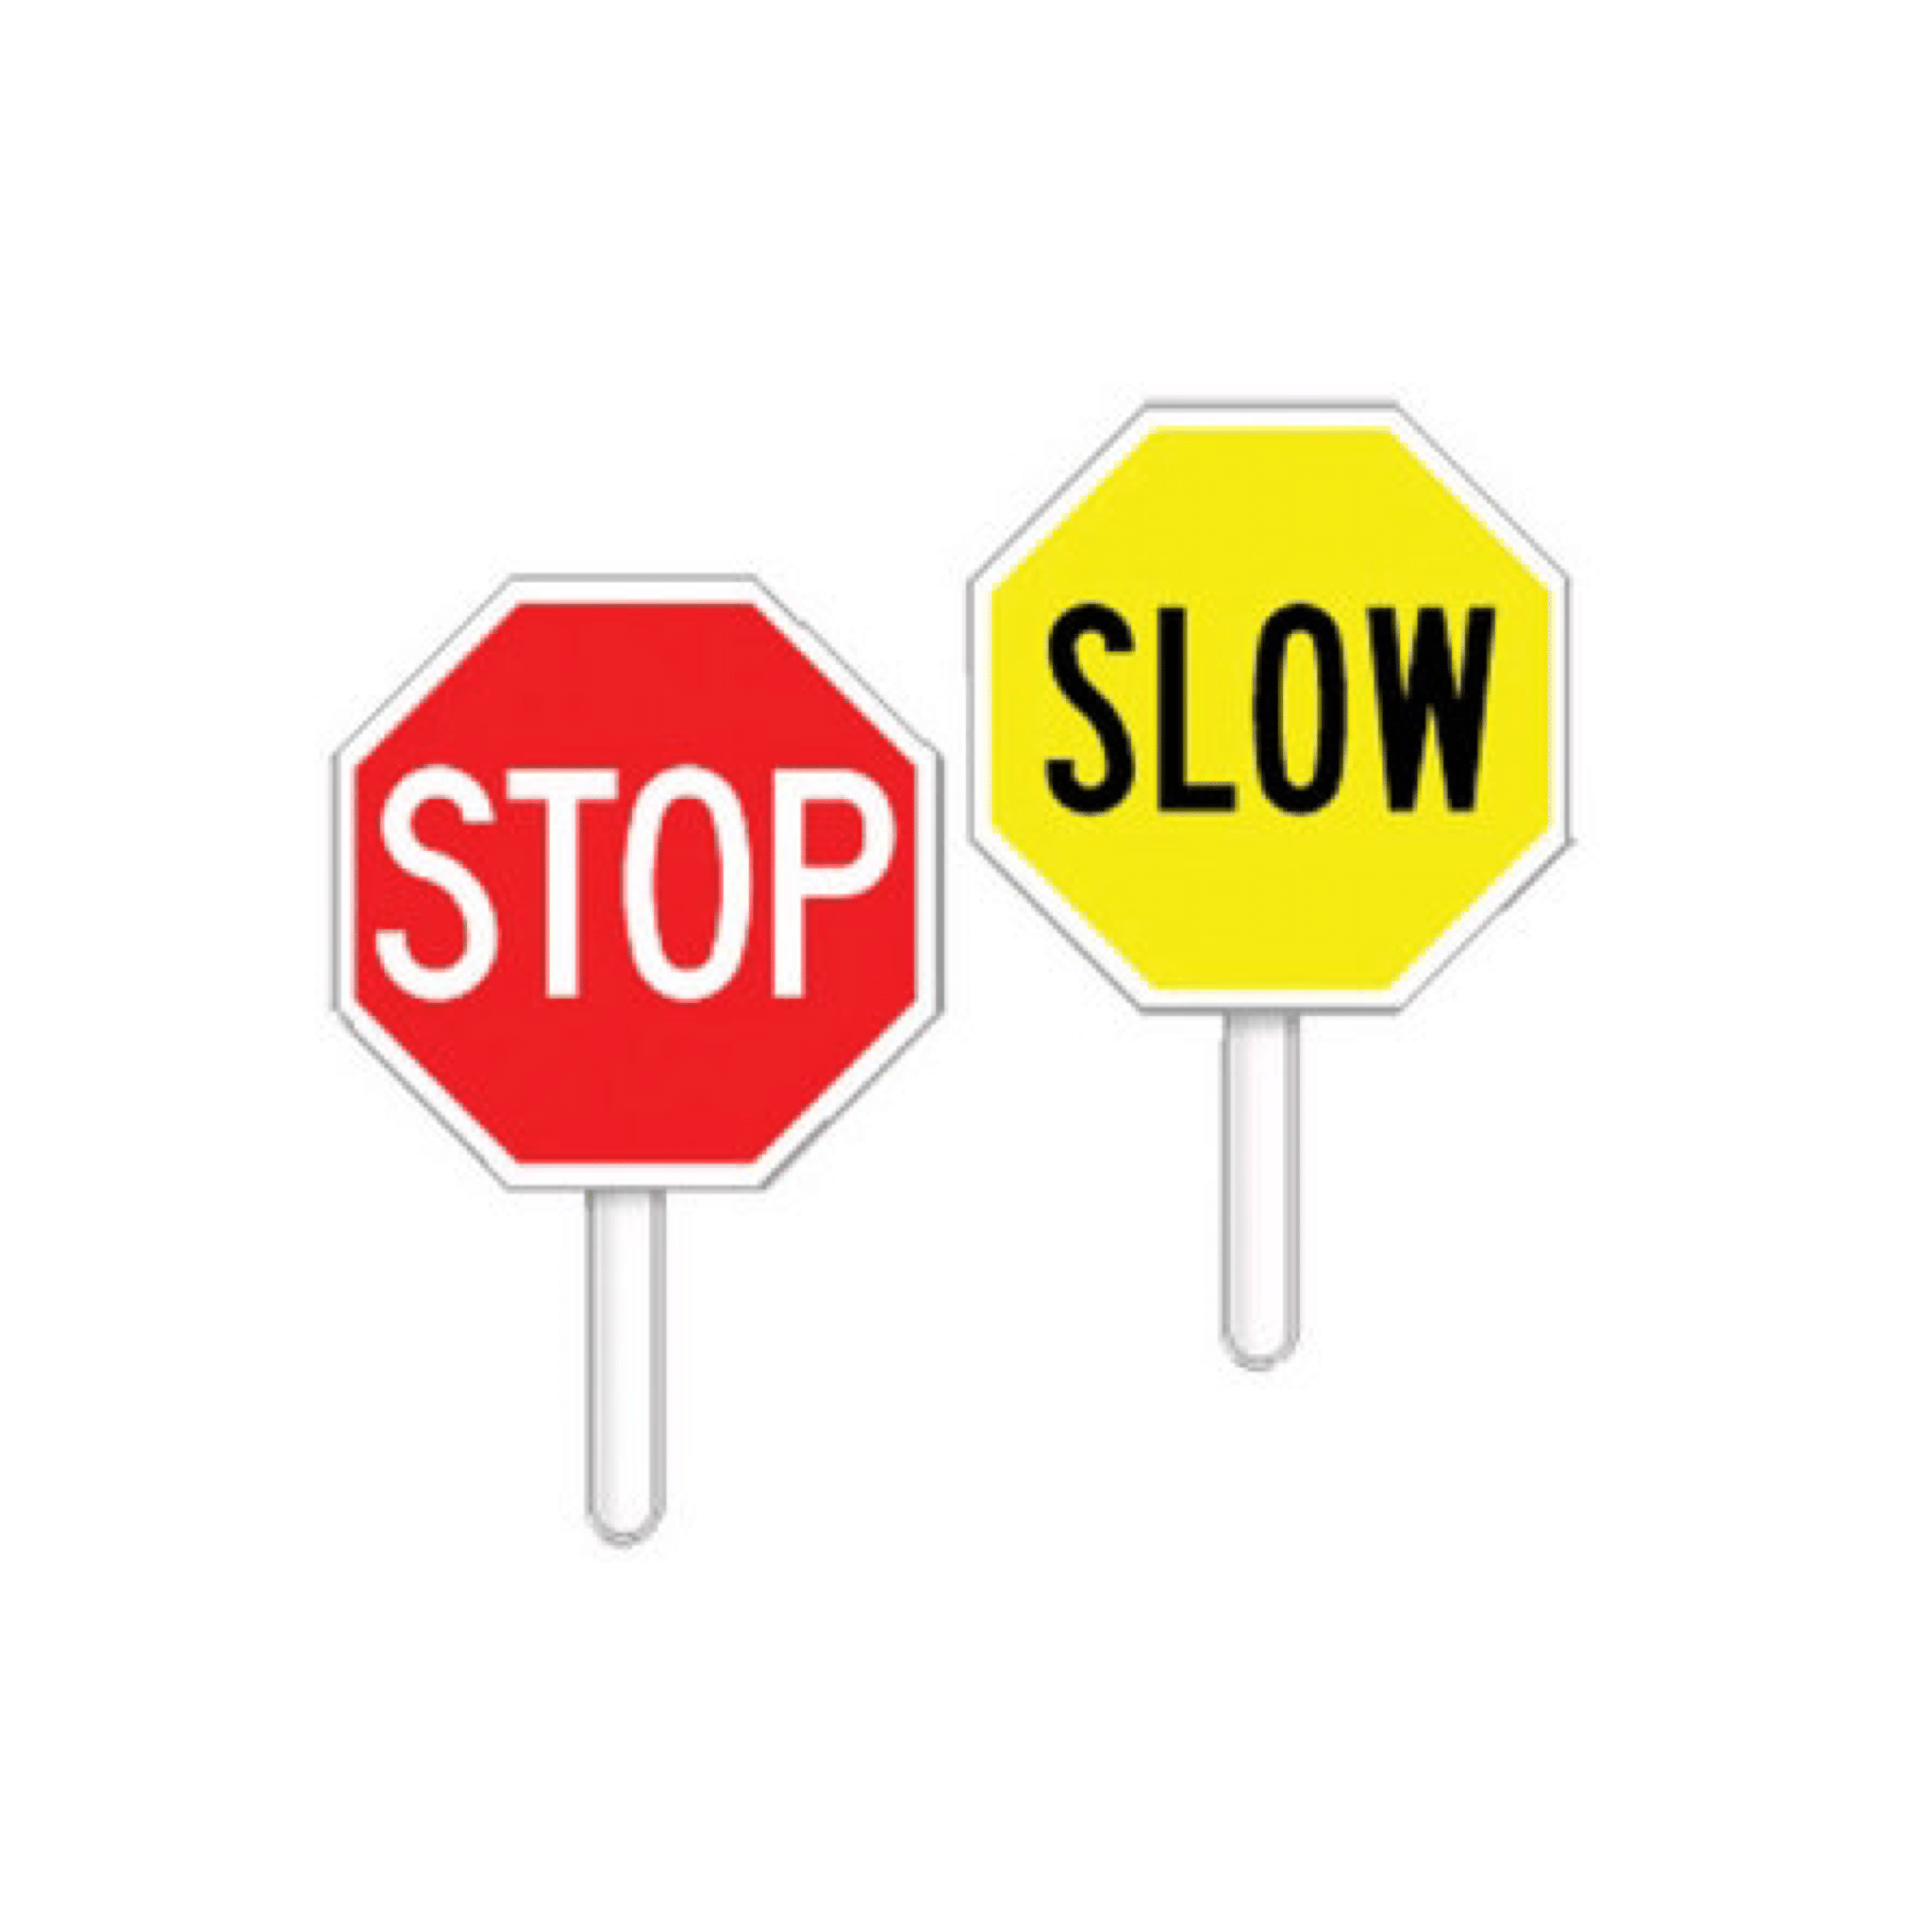 Traffic Control Stop/Slow signs - STOP/STOP or SLOW/STOP - West ...